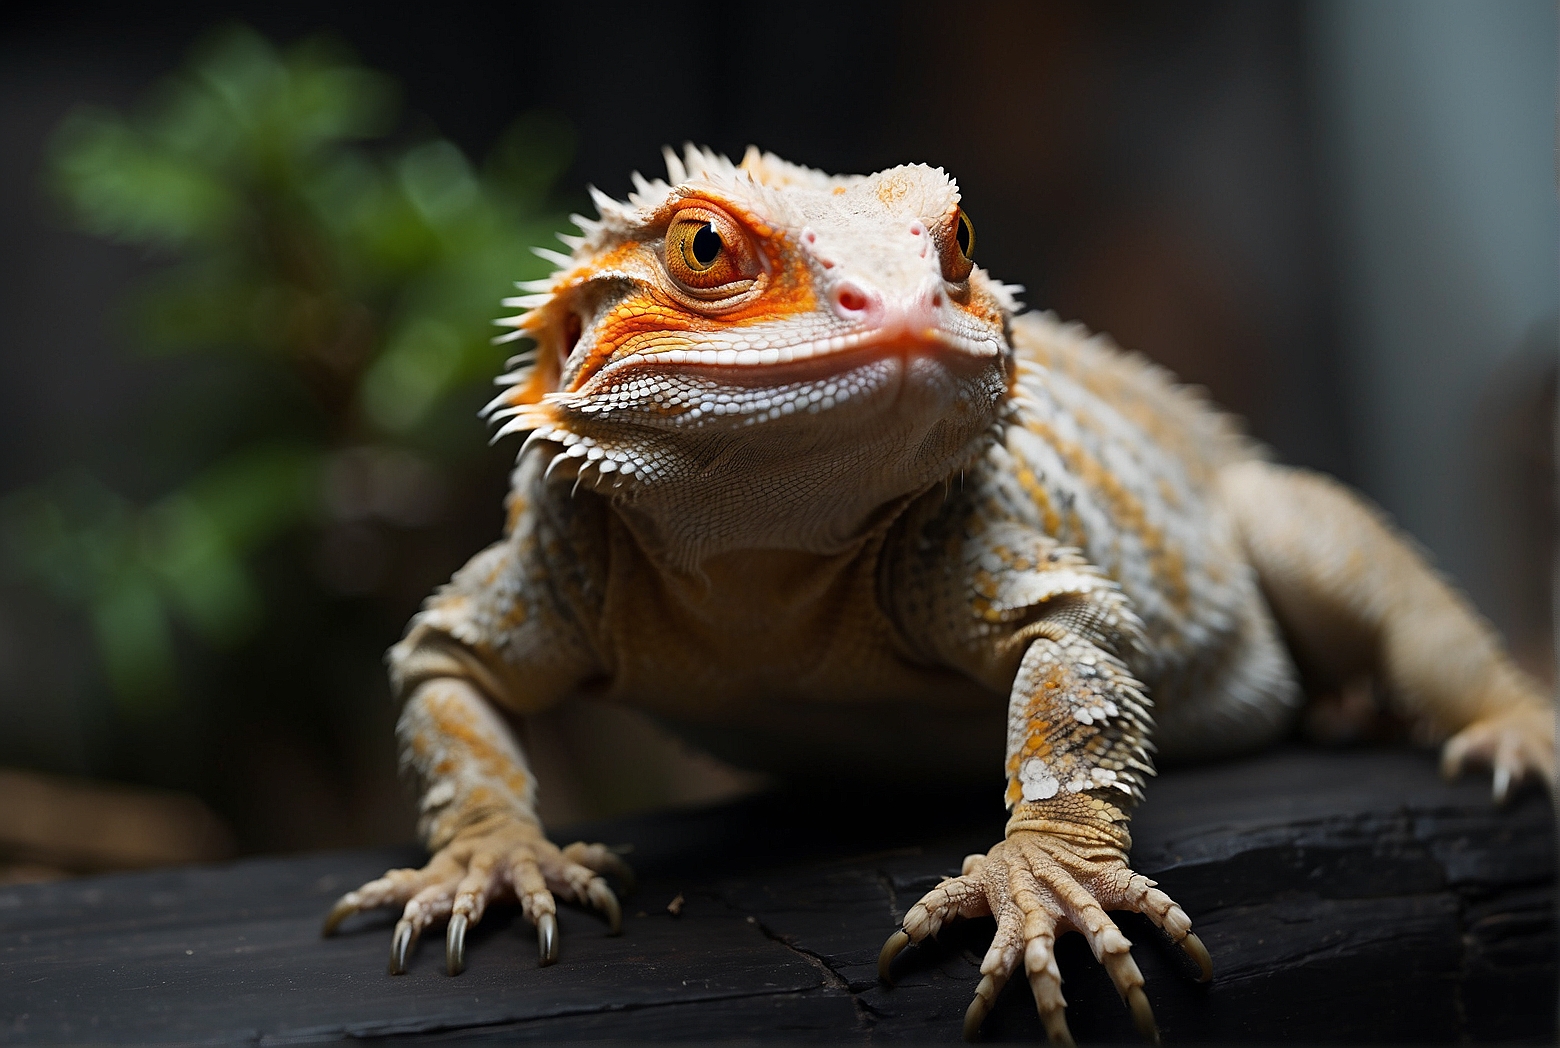 Why Is My Bearded Dragon Scared Of Me All Of A Sudden?